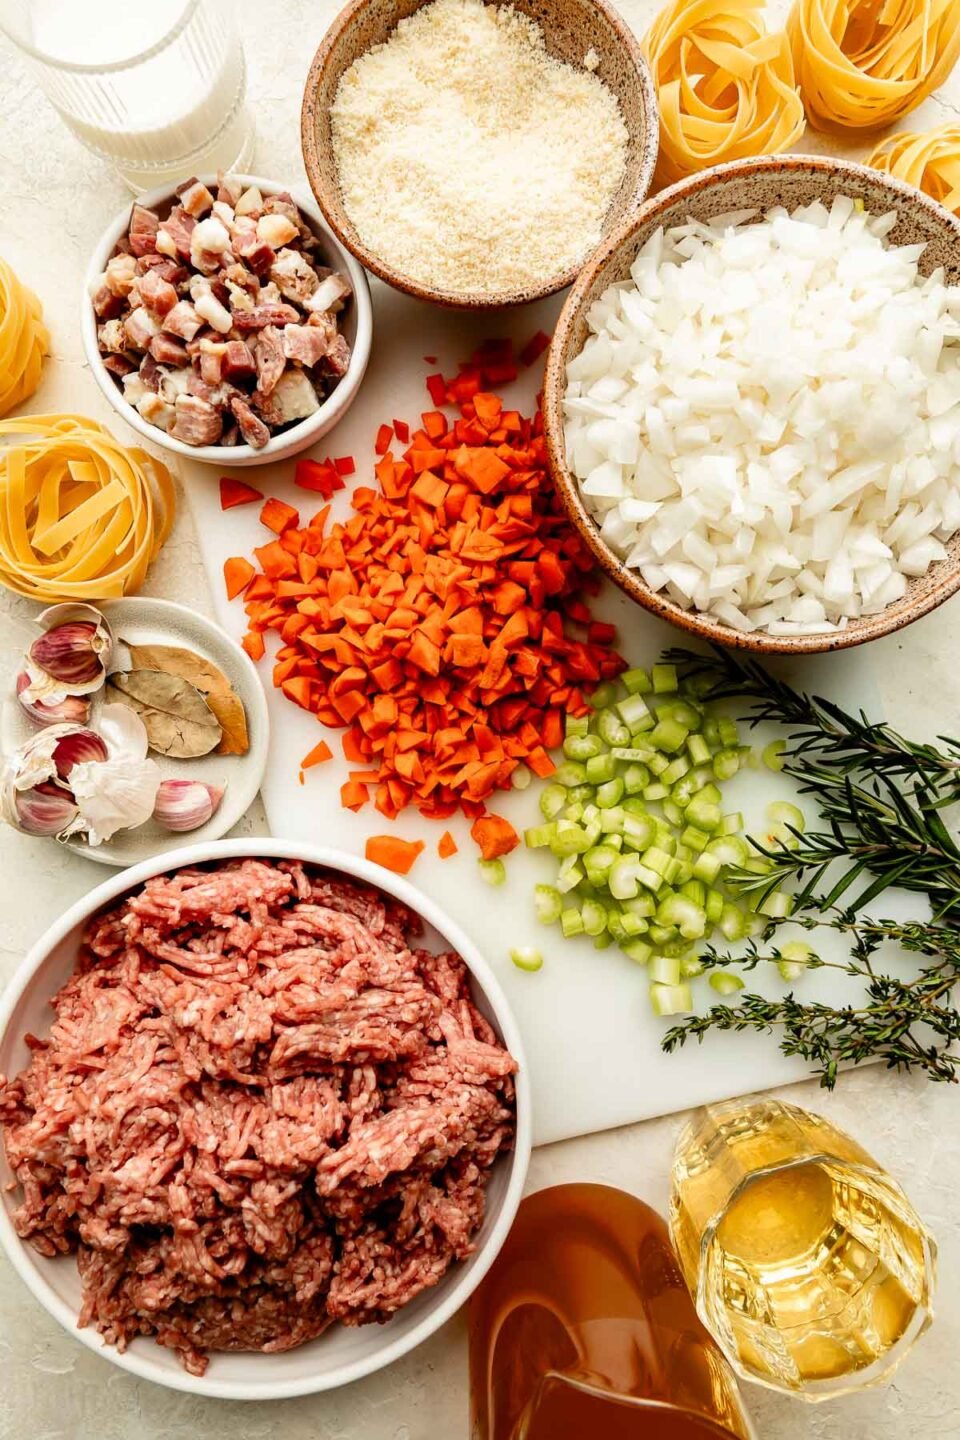 Ingredients are displayed on a white cutting board and off-white surface: chopped carrots, celery, and onions, ground pork, garlic, white wine, dry pasta, grated parmesan, pancetta, broth, heavy cream and fresh herbs.